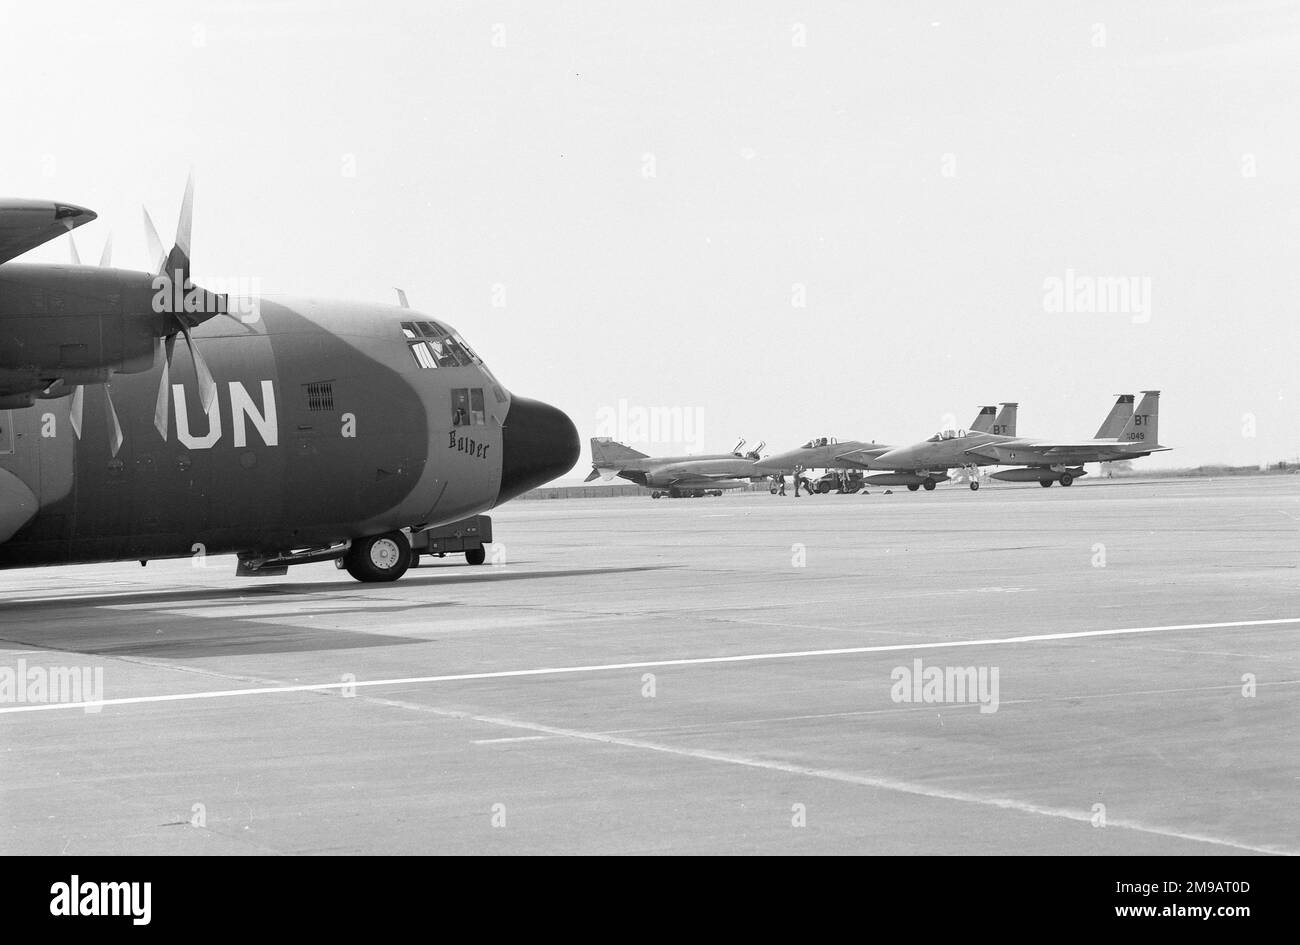 Royal Norwegian Air Force / United Nations - Lockheed C-130H Hercules 954 'Balder', being loaded at RAF Wattisham for a mission supporting the United Nations in 1984. With an RAF Phantom FGR.2 and some visiting United States Air Force F-15 Eagles, from Bitburg Air Force Base in Germany. Stock Photo